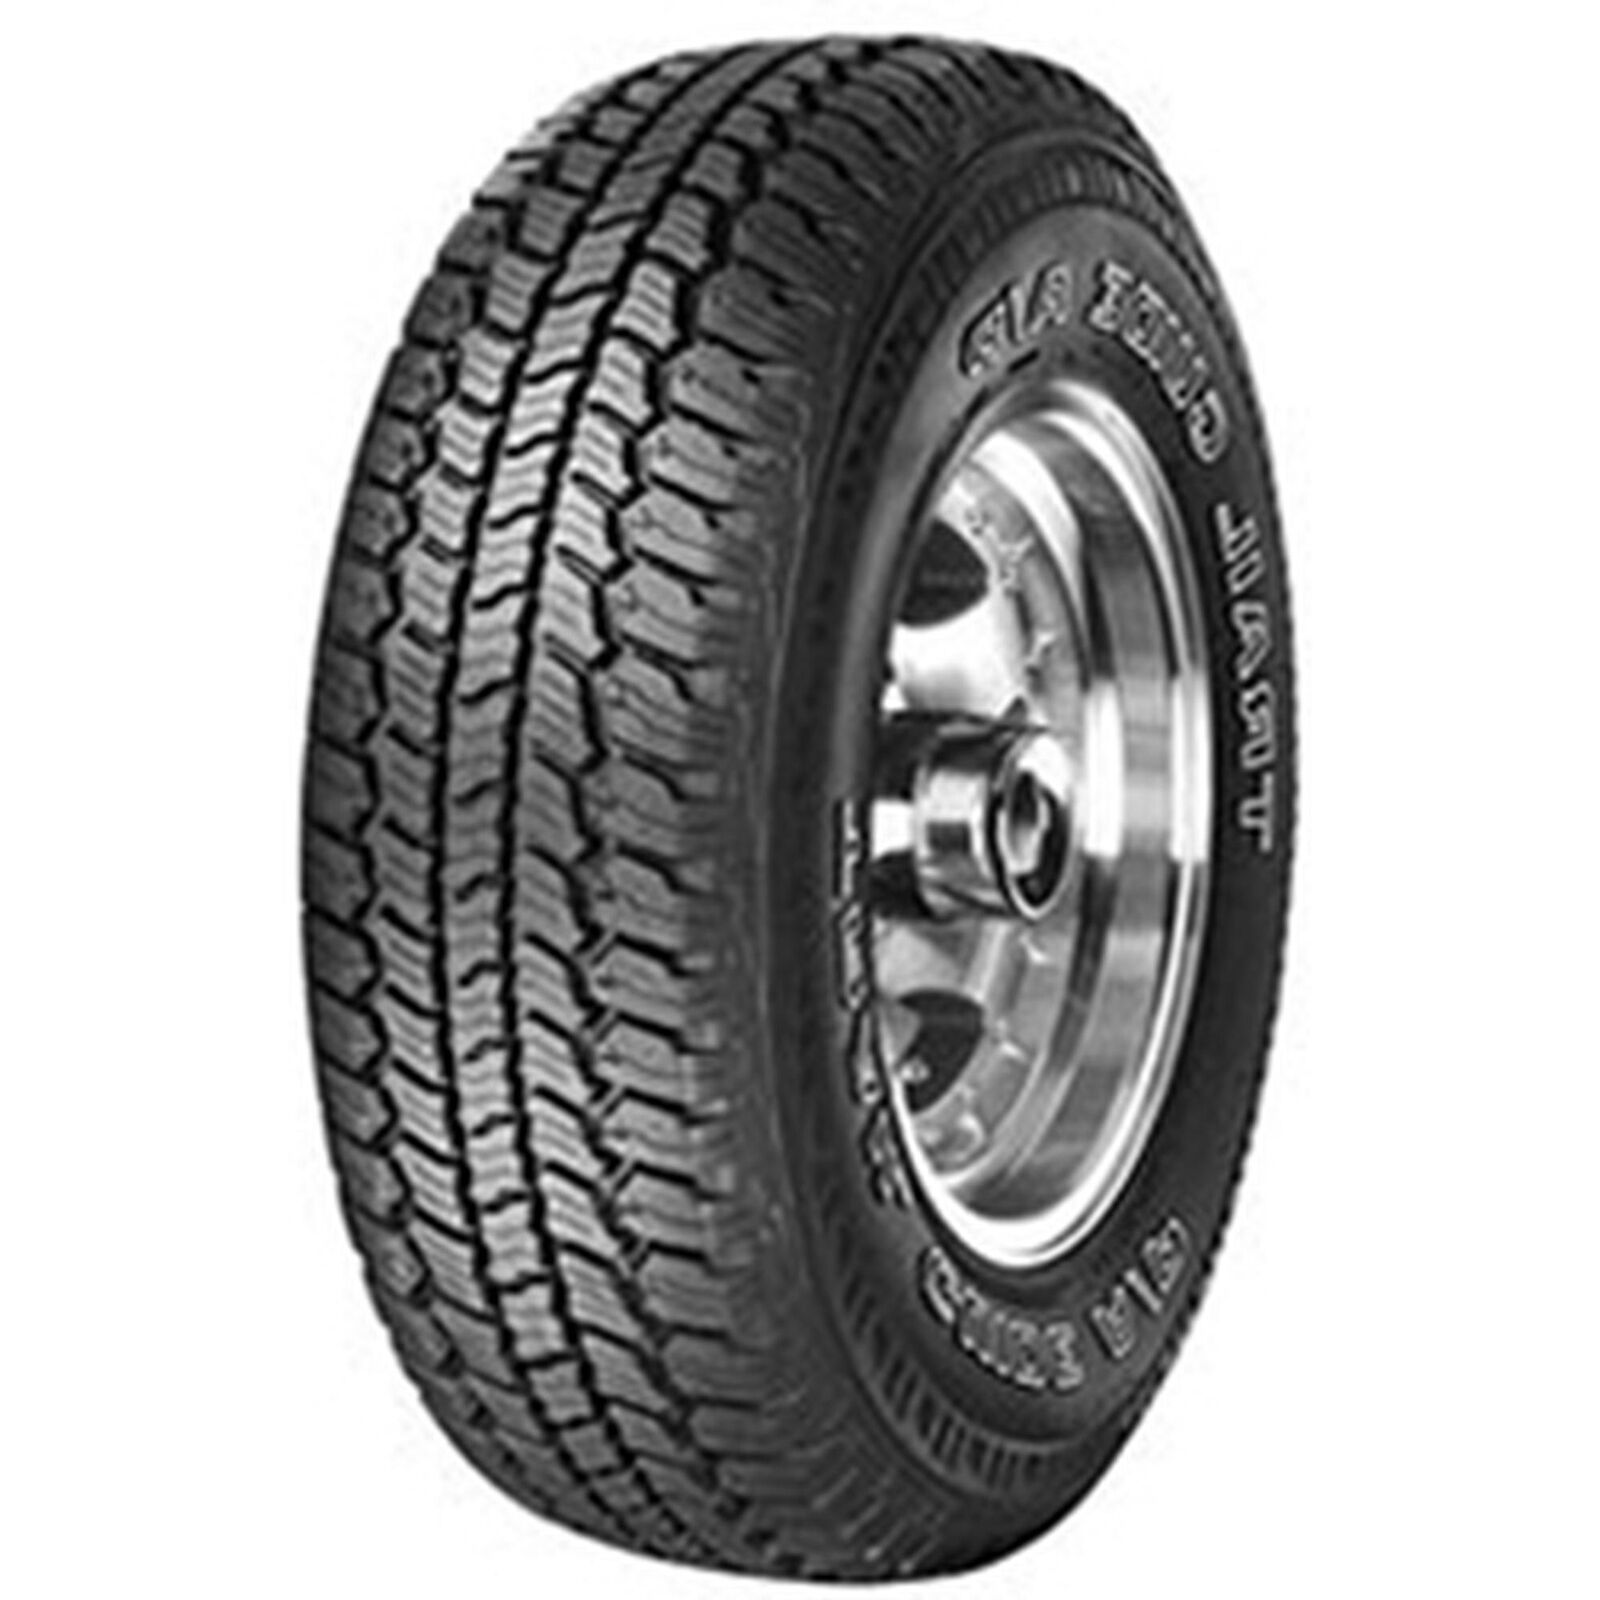 1 New Sigma Trail Guide A/t  - Lt285x70r17 Tires 2857017 285 70 17